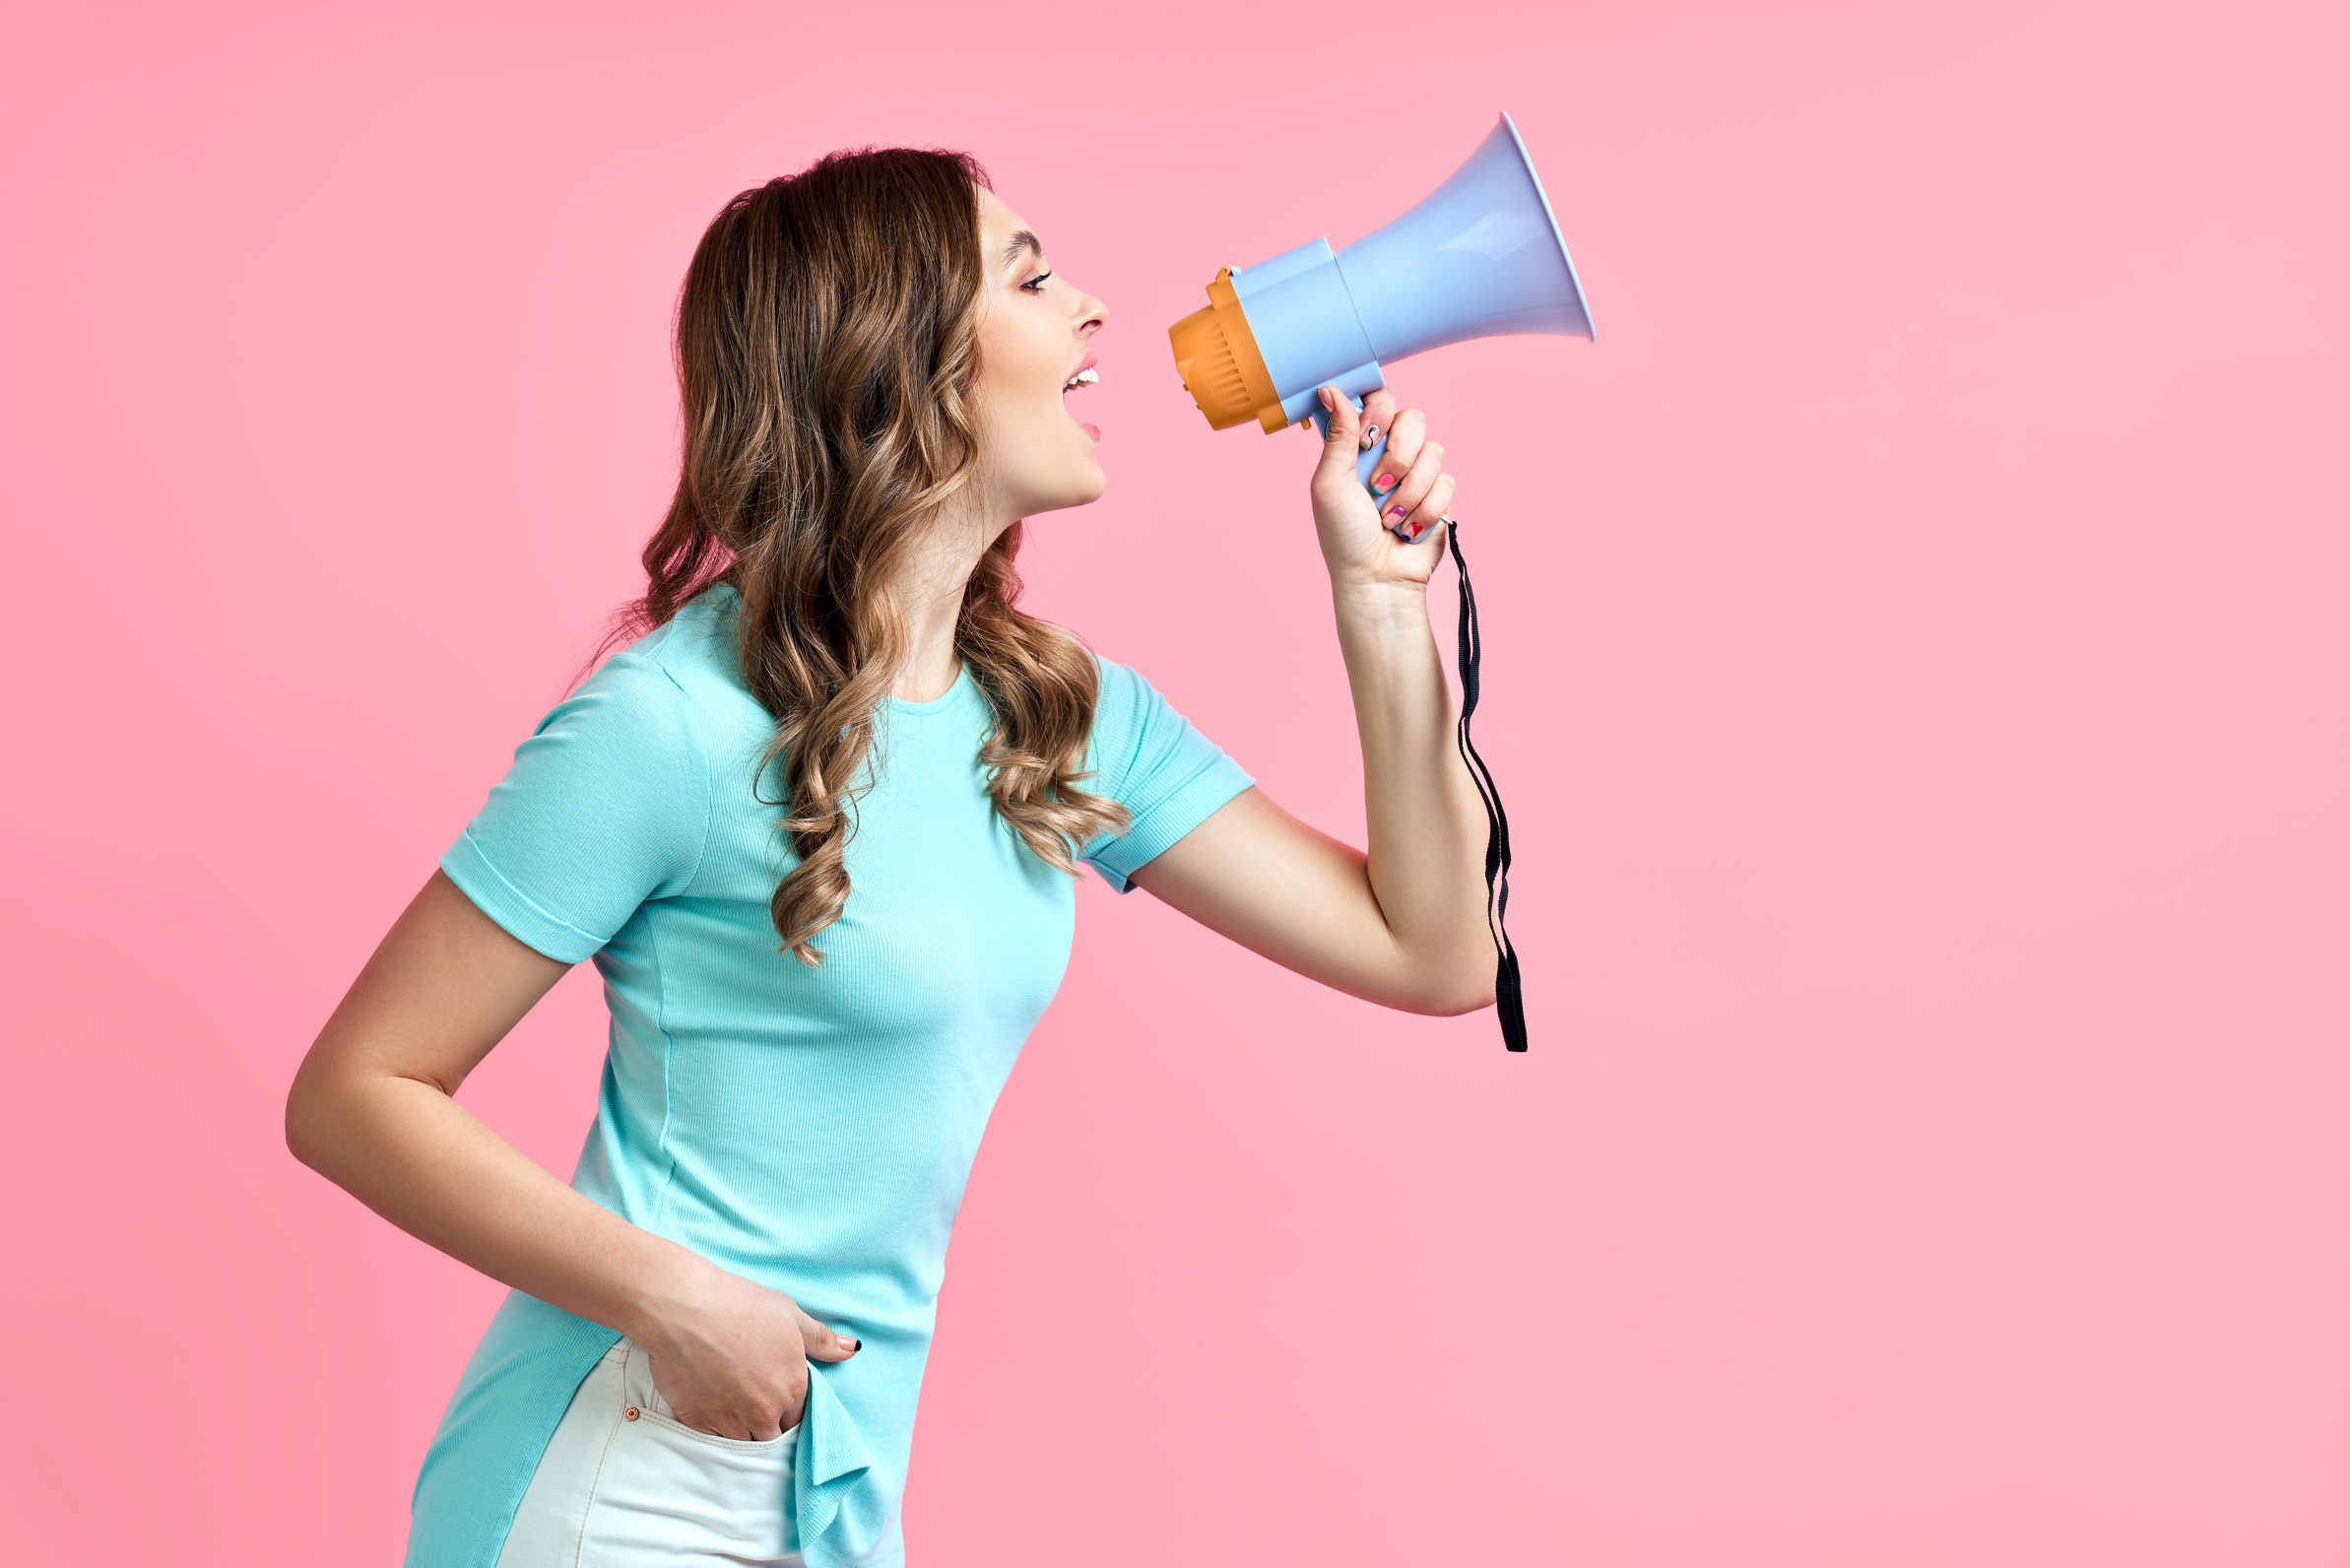 Woman with Megaphone on Pink Background